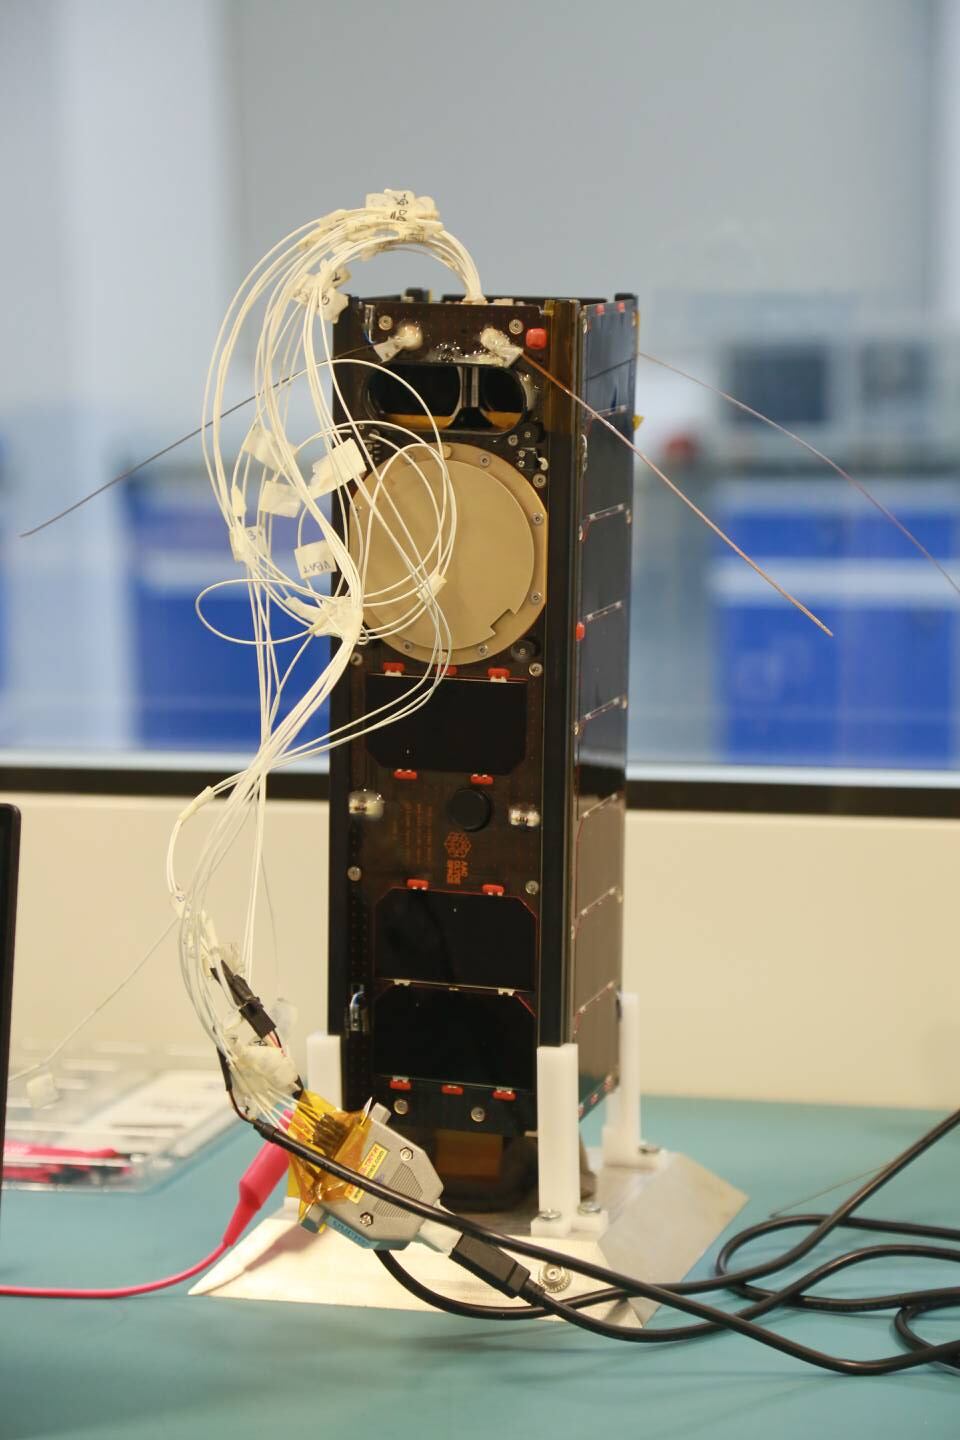 The Sharjah-Sat-1 is a CubeSat, a modular satellite, that will study the Sun and space weather.